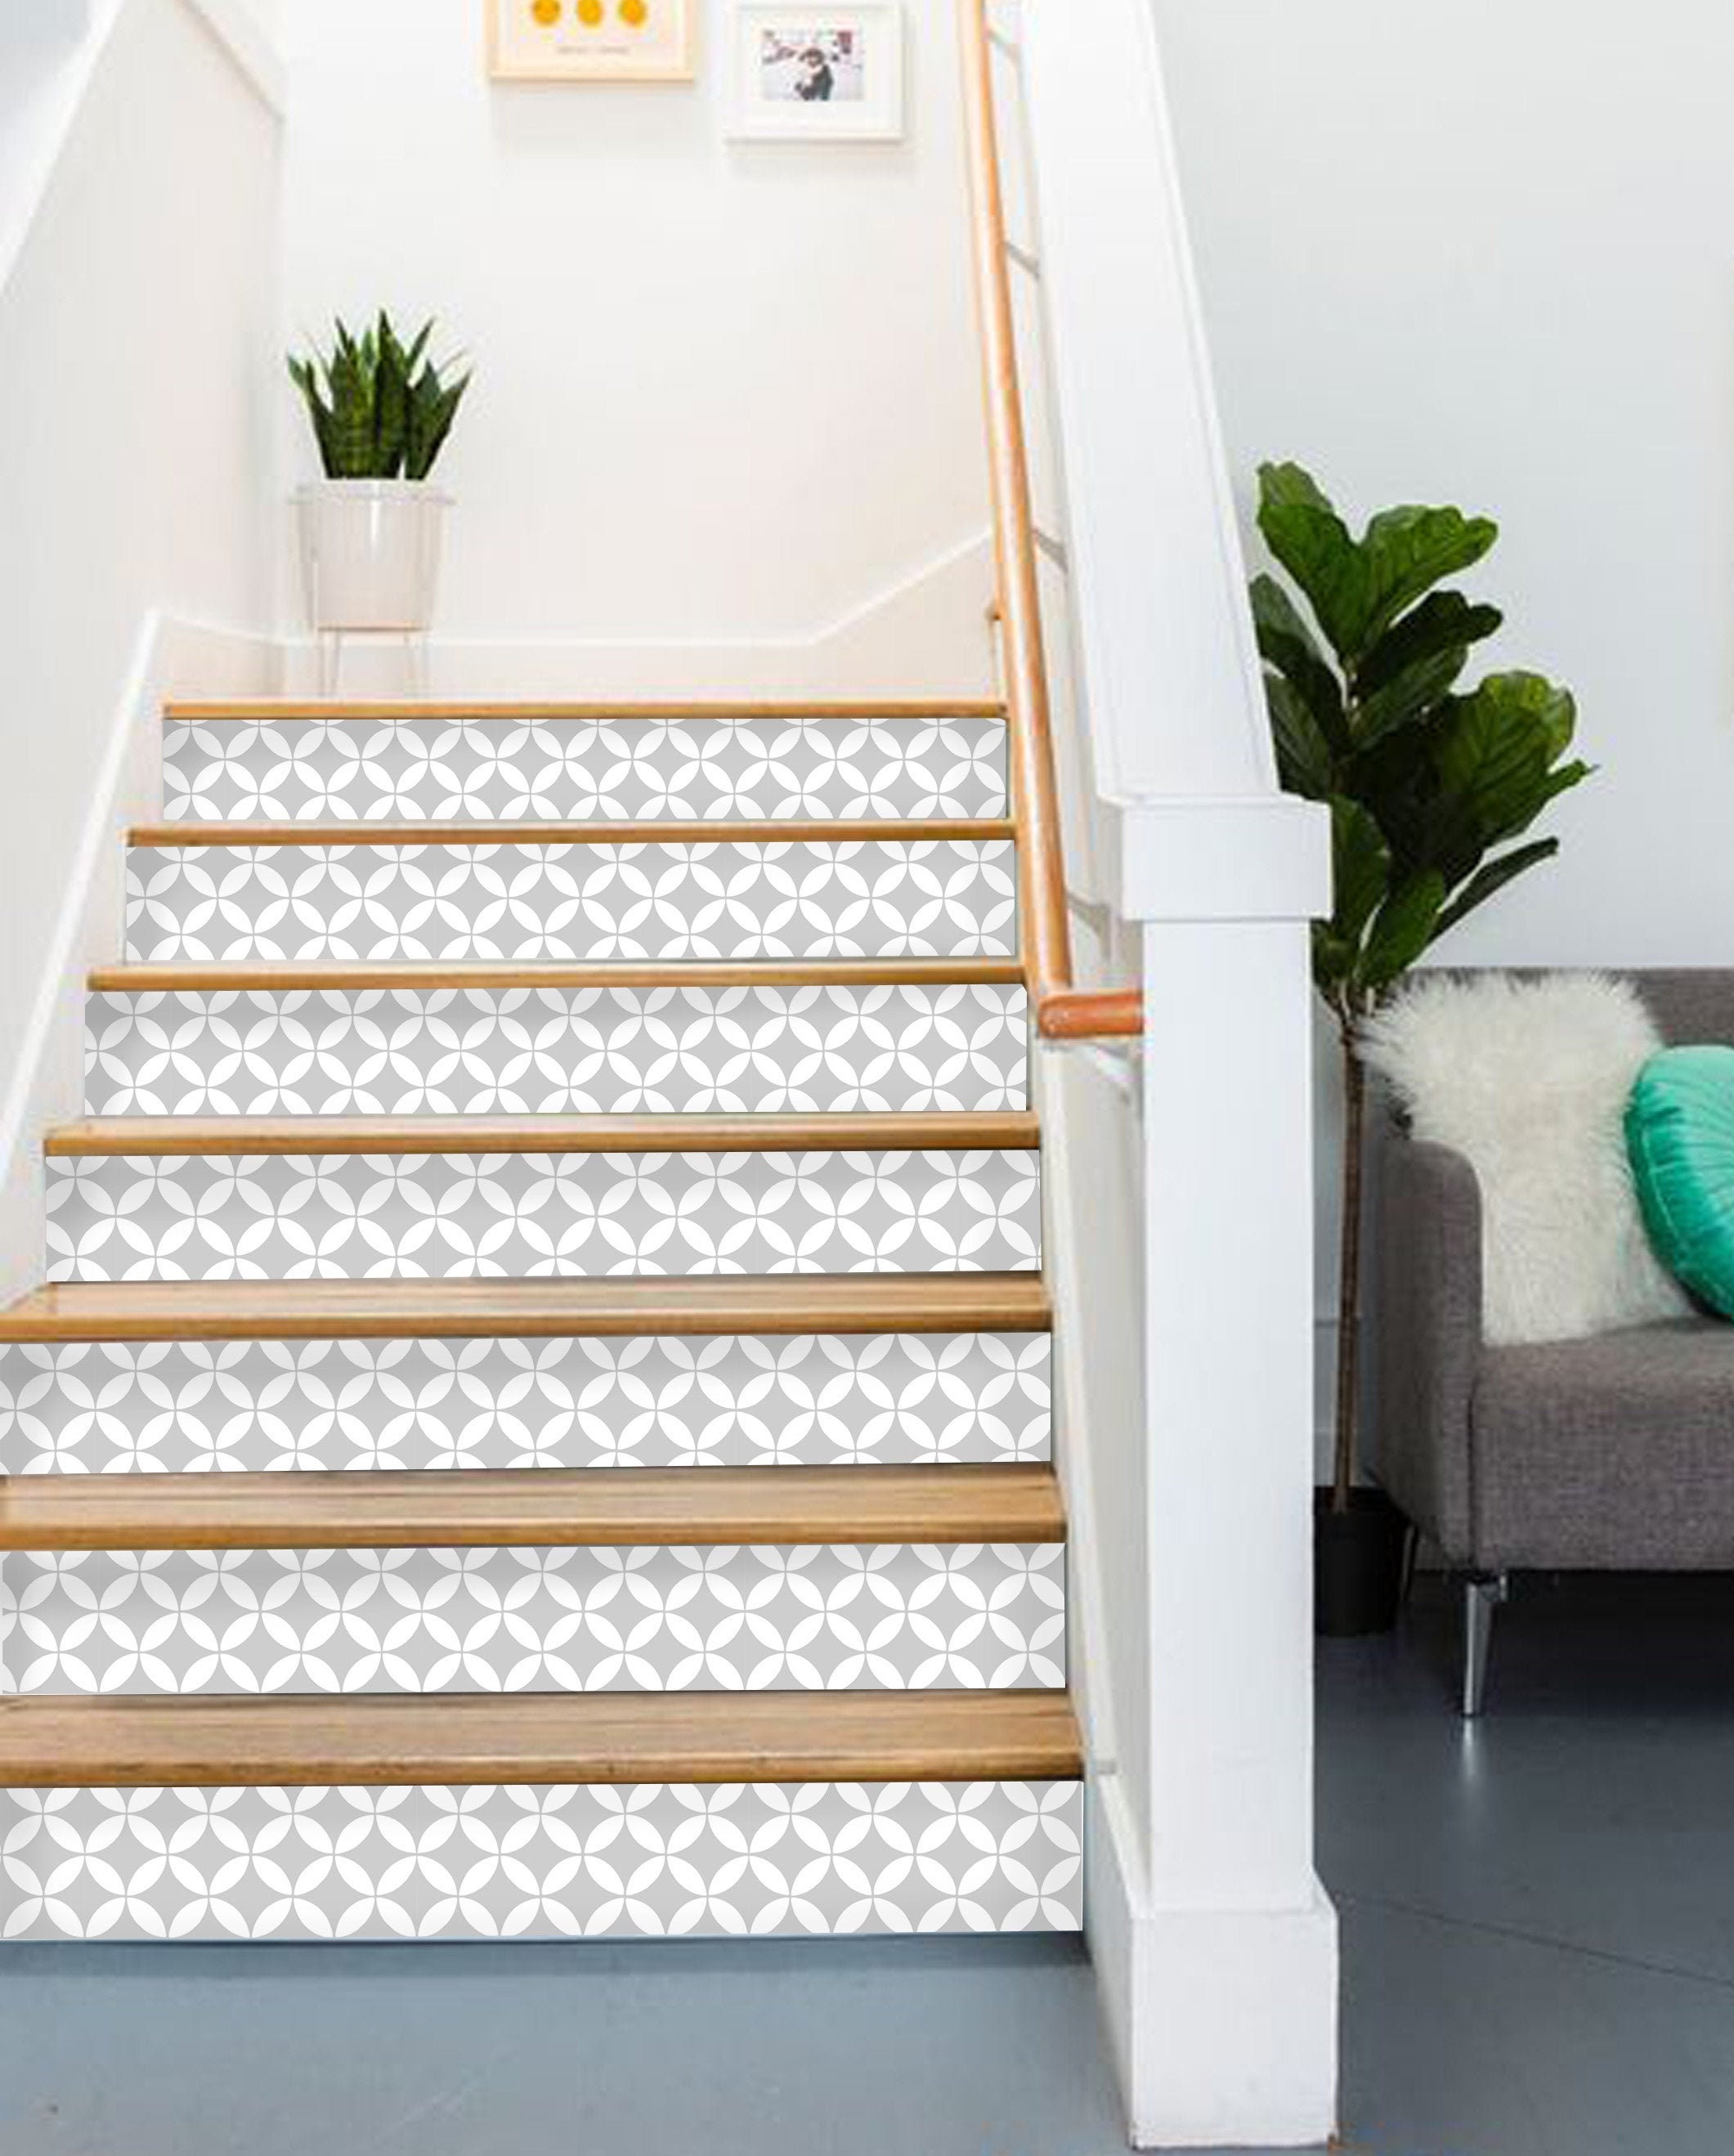 10 PeelandStick Stair Riser Decals To Spruce Up Your Staircase Stat   Rachael Ray Show